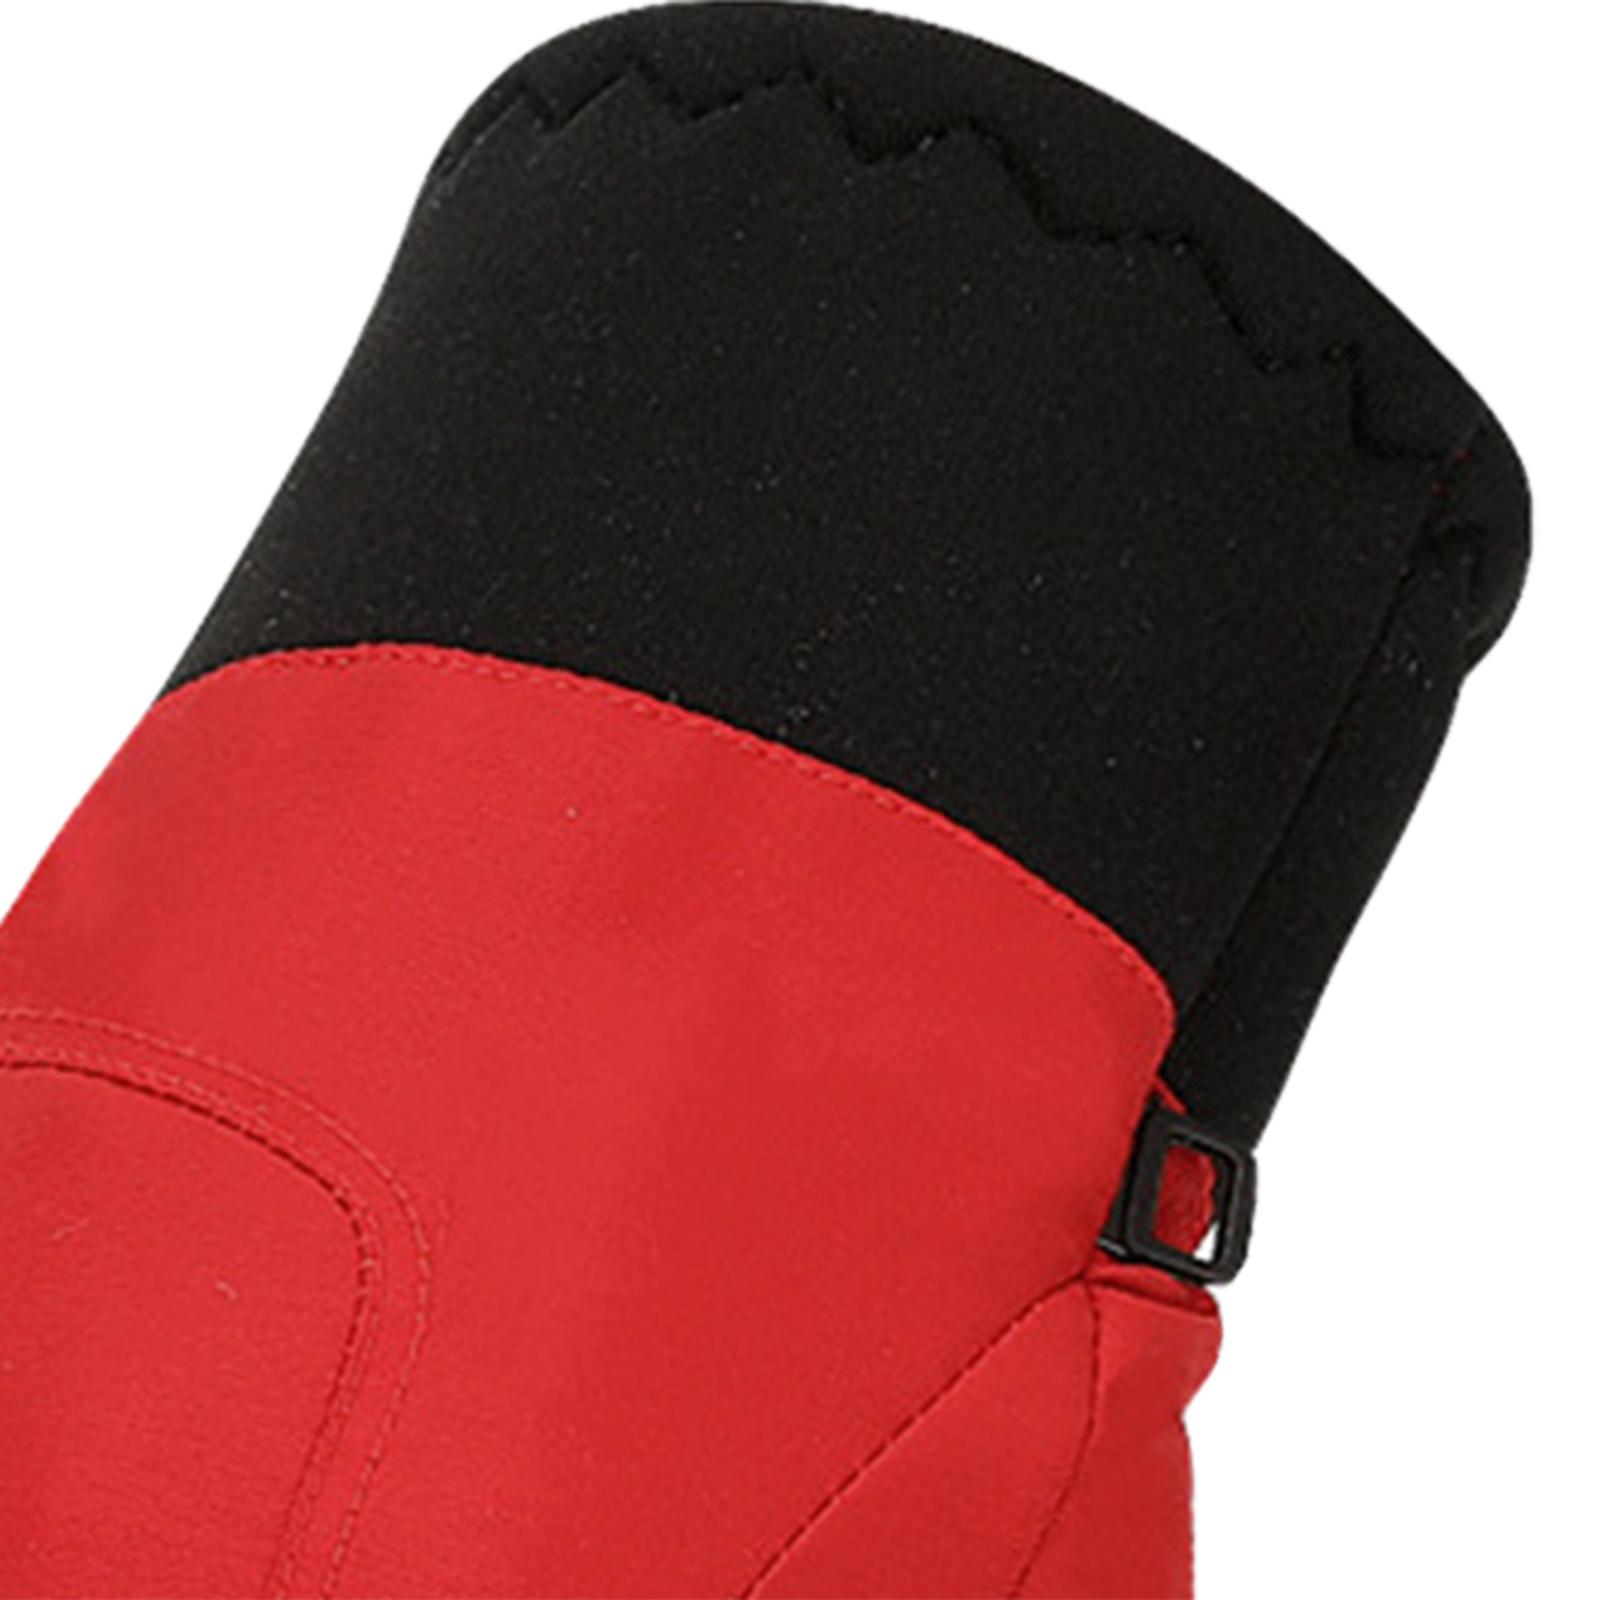 Ski Gloves Touchscreen Texting Typing Winter Warm Gloves for Outdoor Sport Red